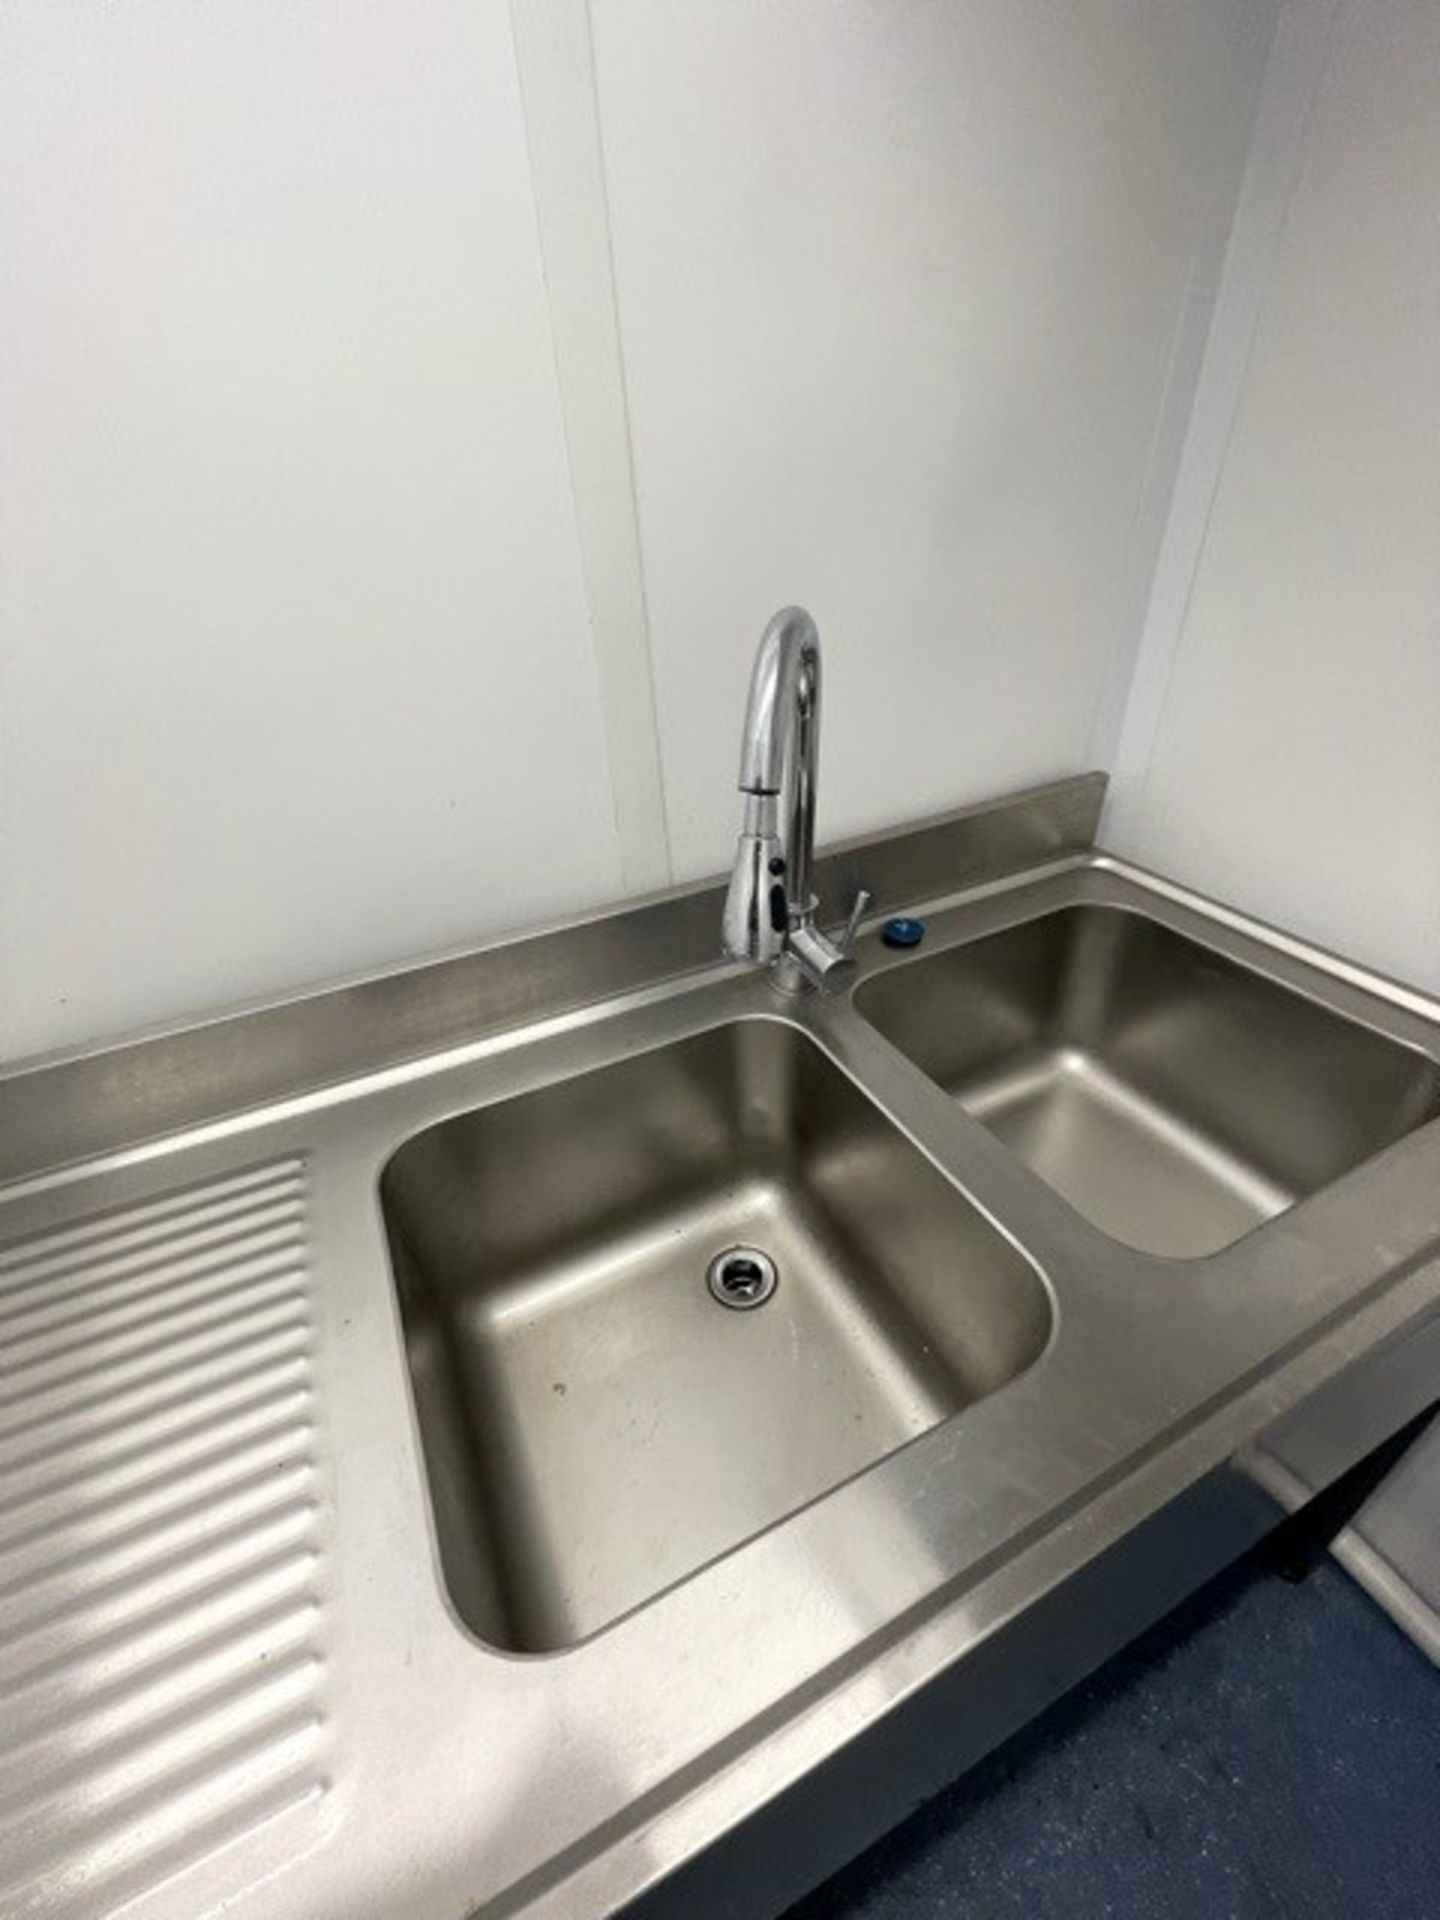 Commercial Sink Stainless Steel 2 Bowls Including - Image 4 of 5